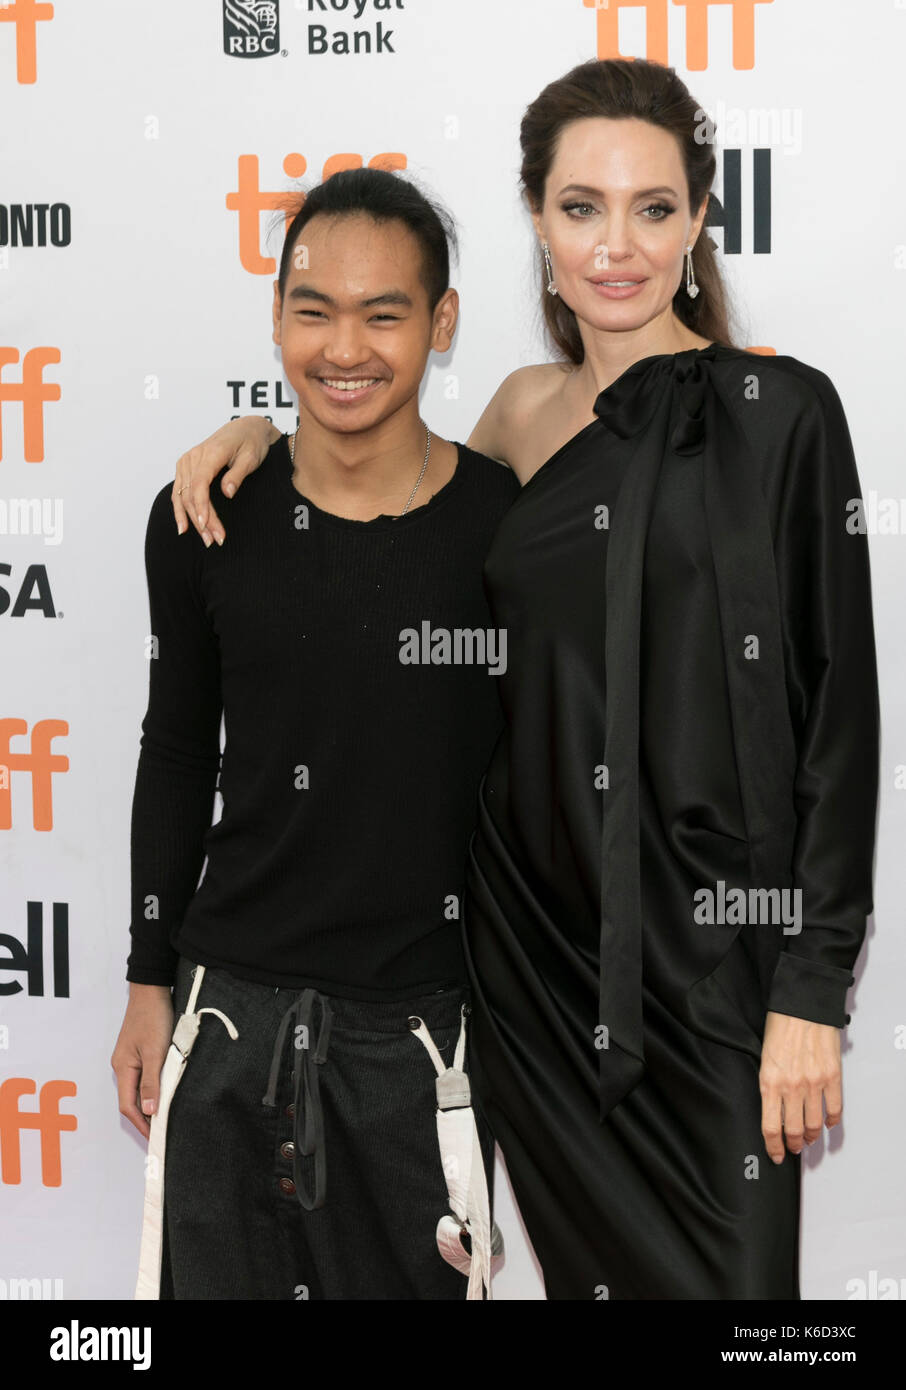 Toronto, Canada. 11th Sep, 2017. Pax Thien Jolie-Pitt (l) and Angelina Jolie attend the premiere of 'First They Killed My Father' during the 42nd Toronto International Film Festival, tiff, at Princess of Wales Theatre in Toronto, Canada, on 11 September 2017. · NO WIRE SERVICE · Photo: Hubert Boesl/dpa/Alamy Live News Stock Photo